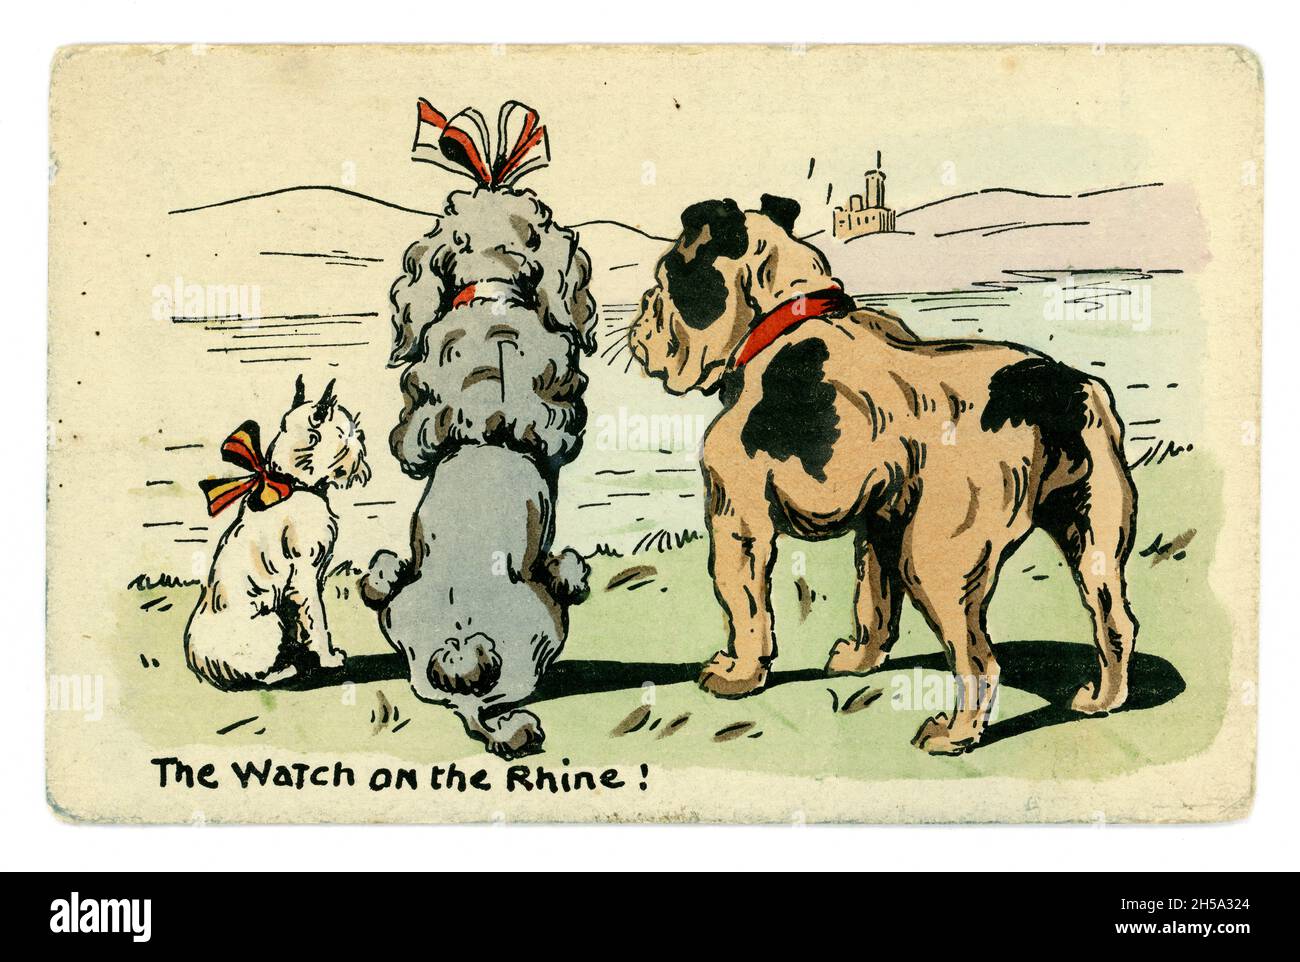 Original WW1 postcard of 3 dogs representing the allies - France Belgium, Britain. The Watch on the Rhine! was a German patriotic anthem. Card published By E.W. Savory Ltd. Bristol, U.K. circa 1914 Stock Photo